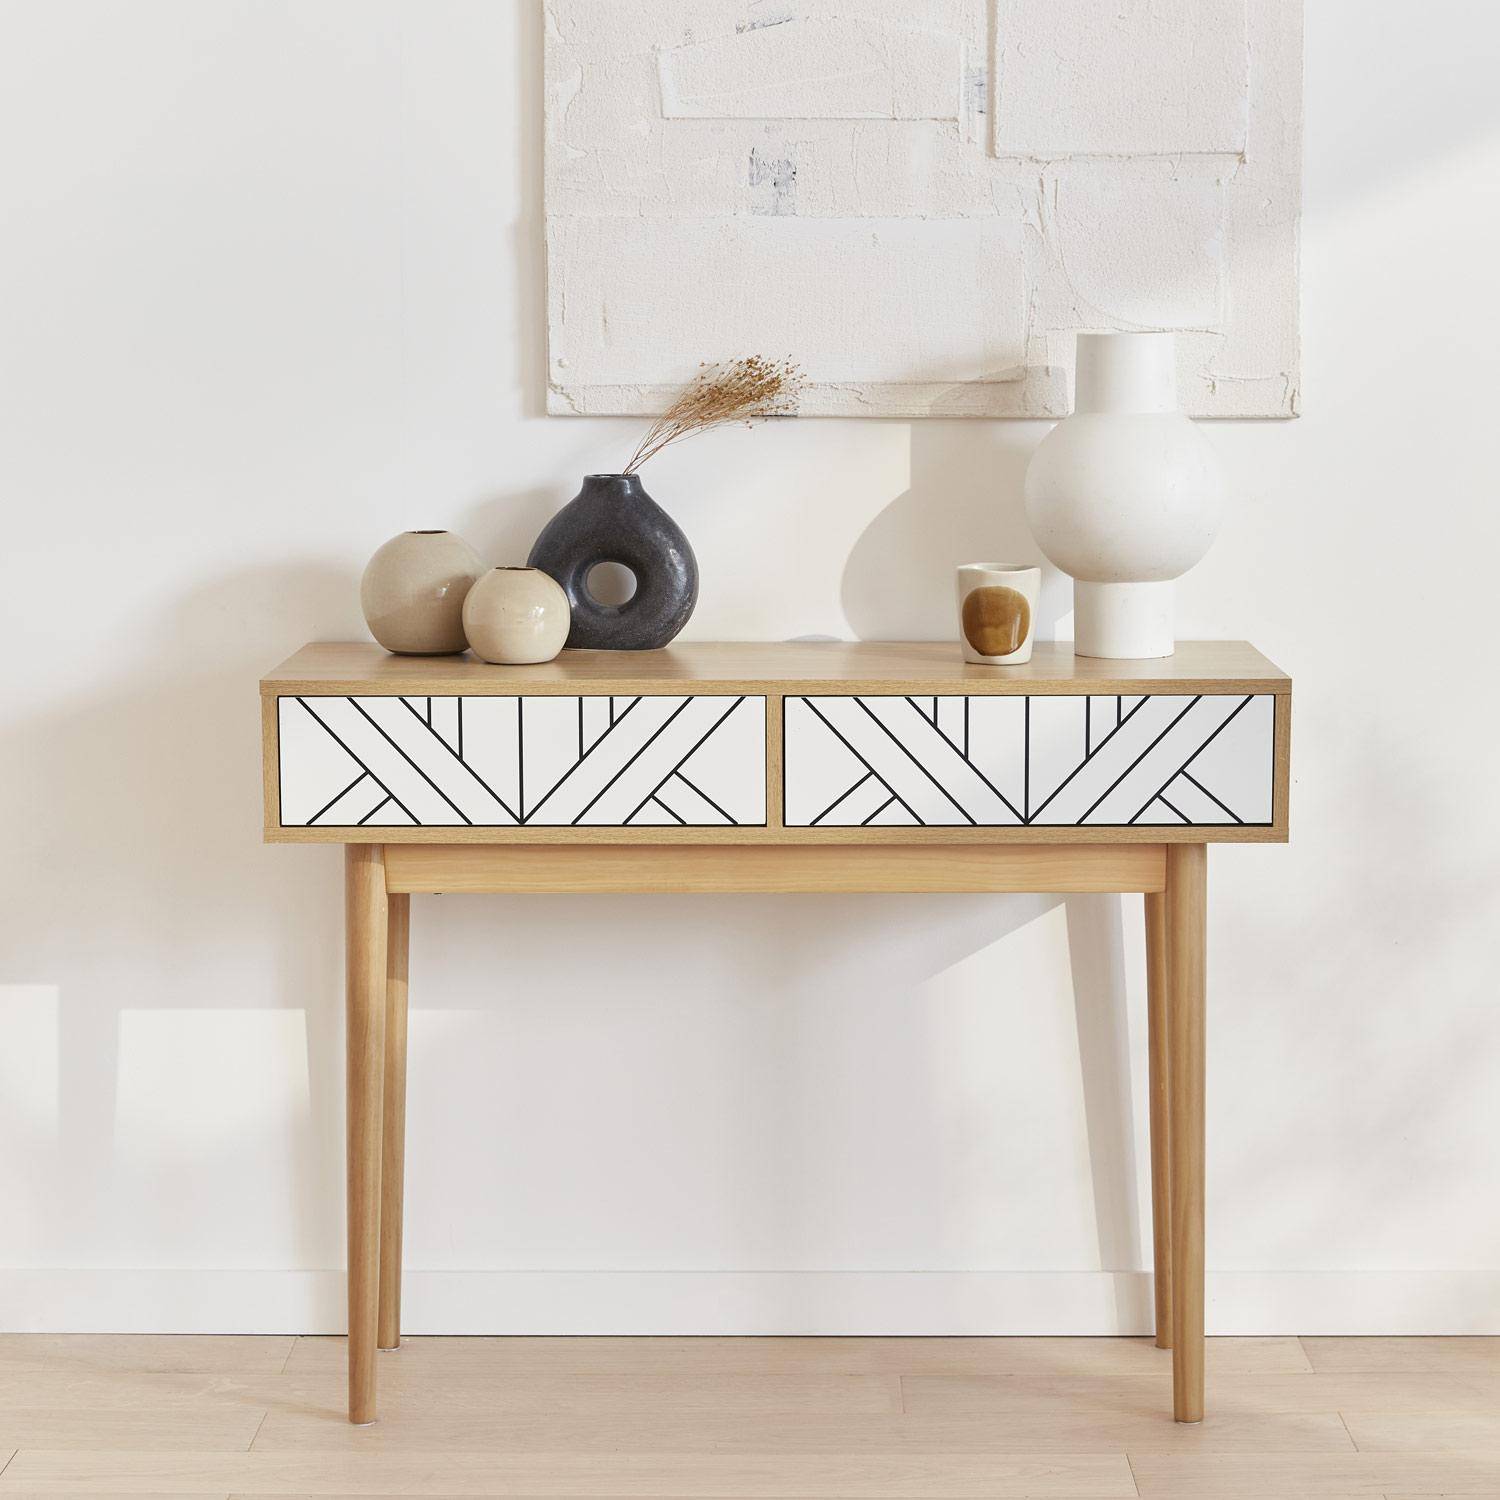 Wood-effect console table, 100x55x75cm, Mika, White Photo1